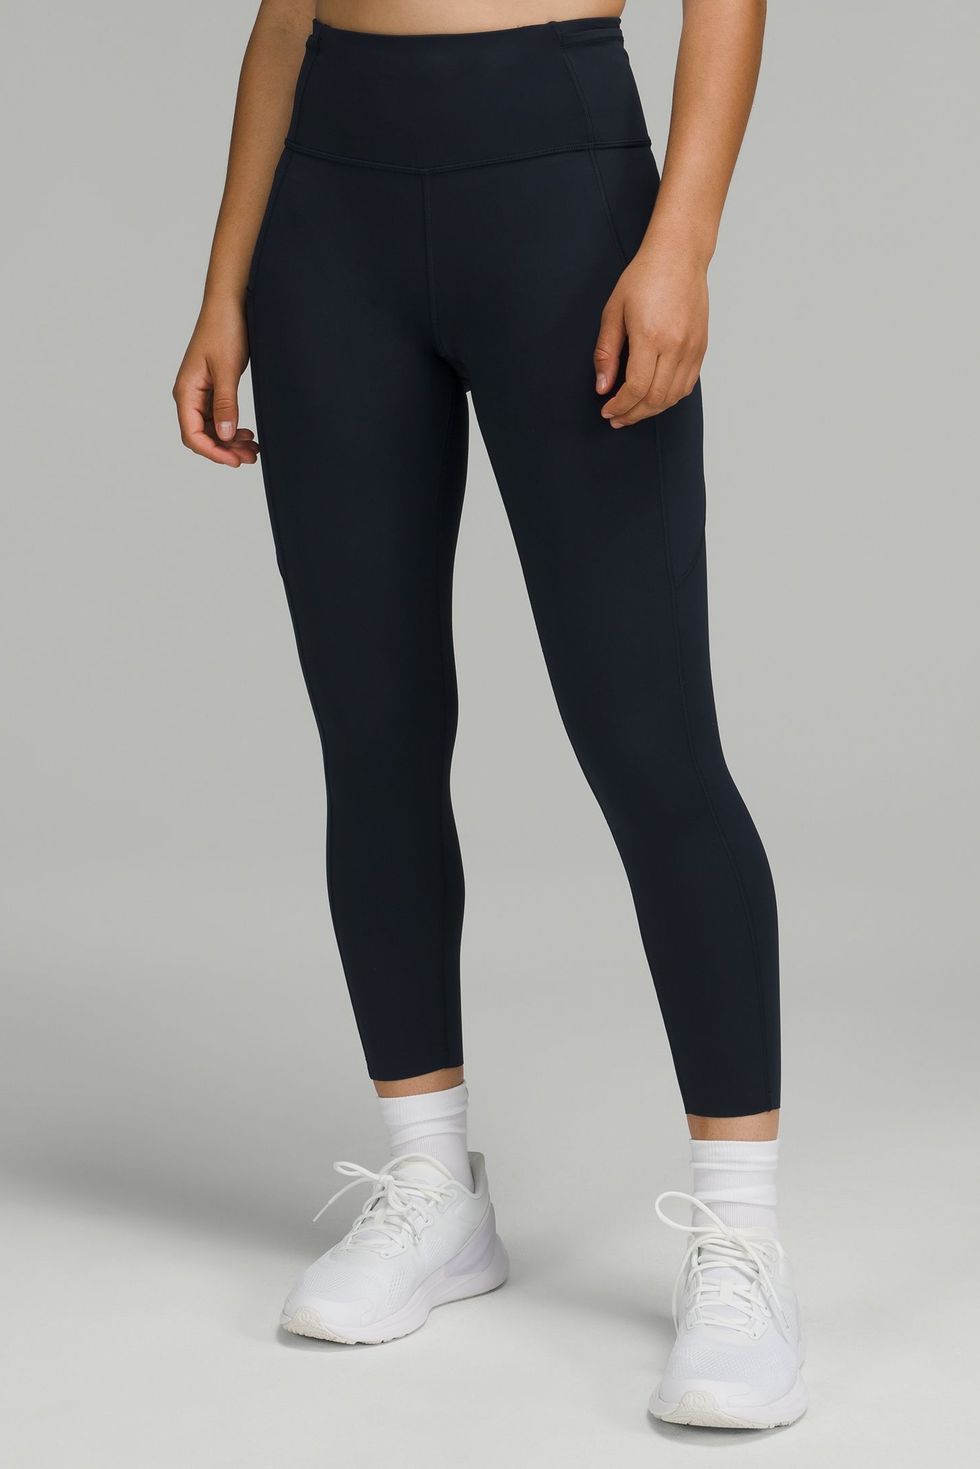 Fast and Free High-Rise Crop 23" Leggings